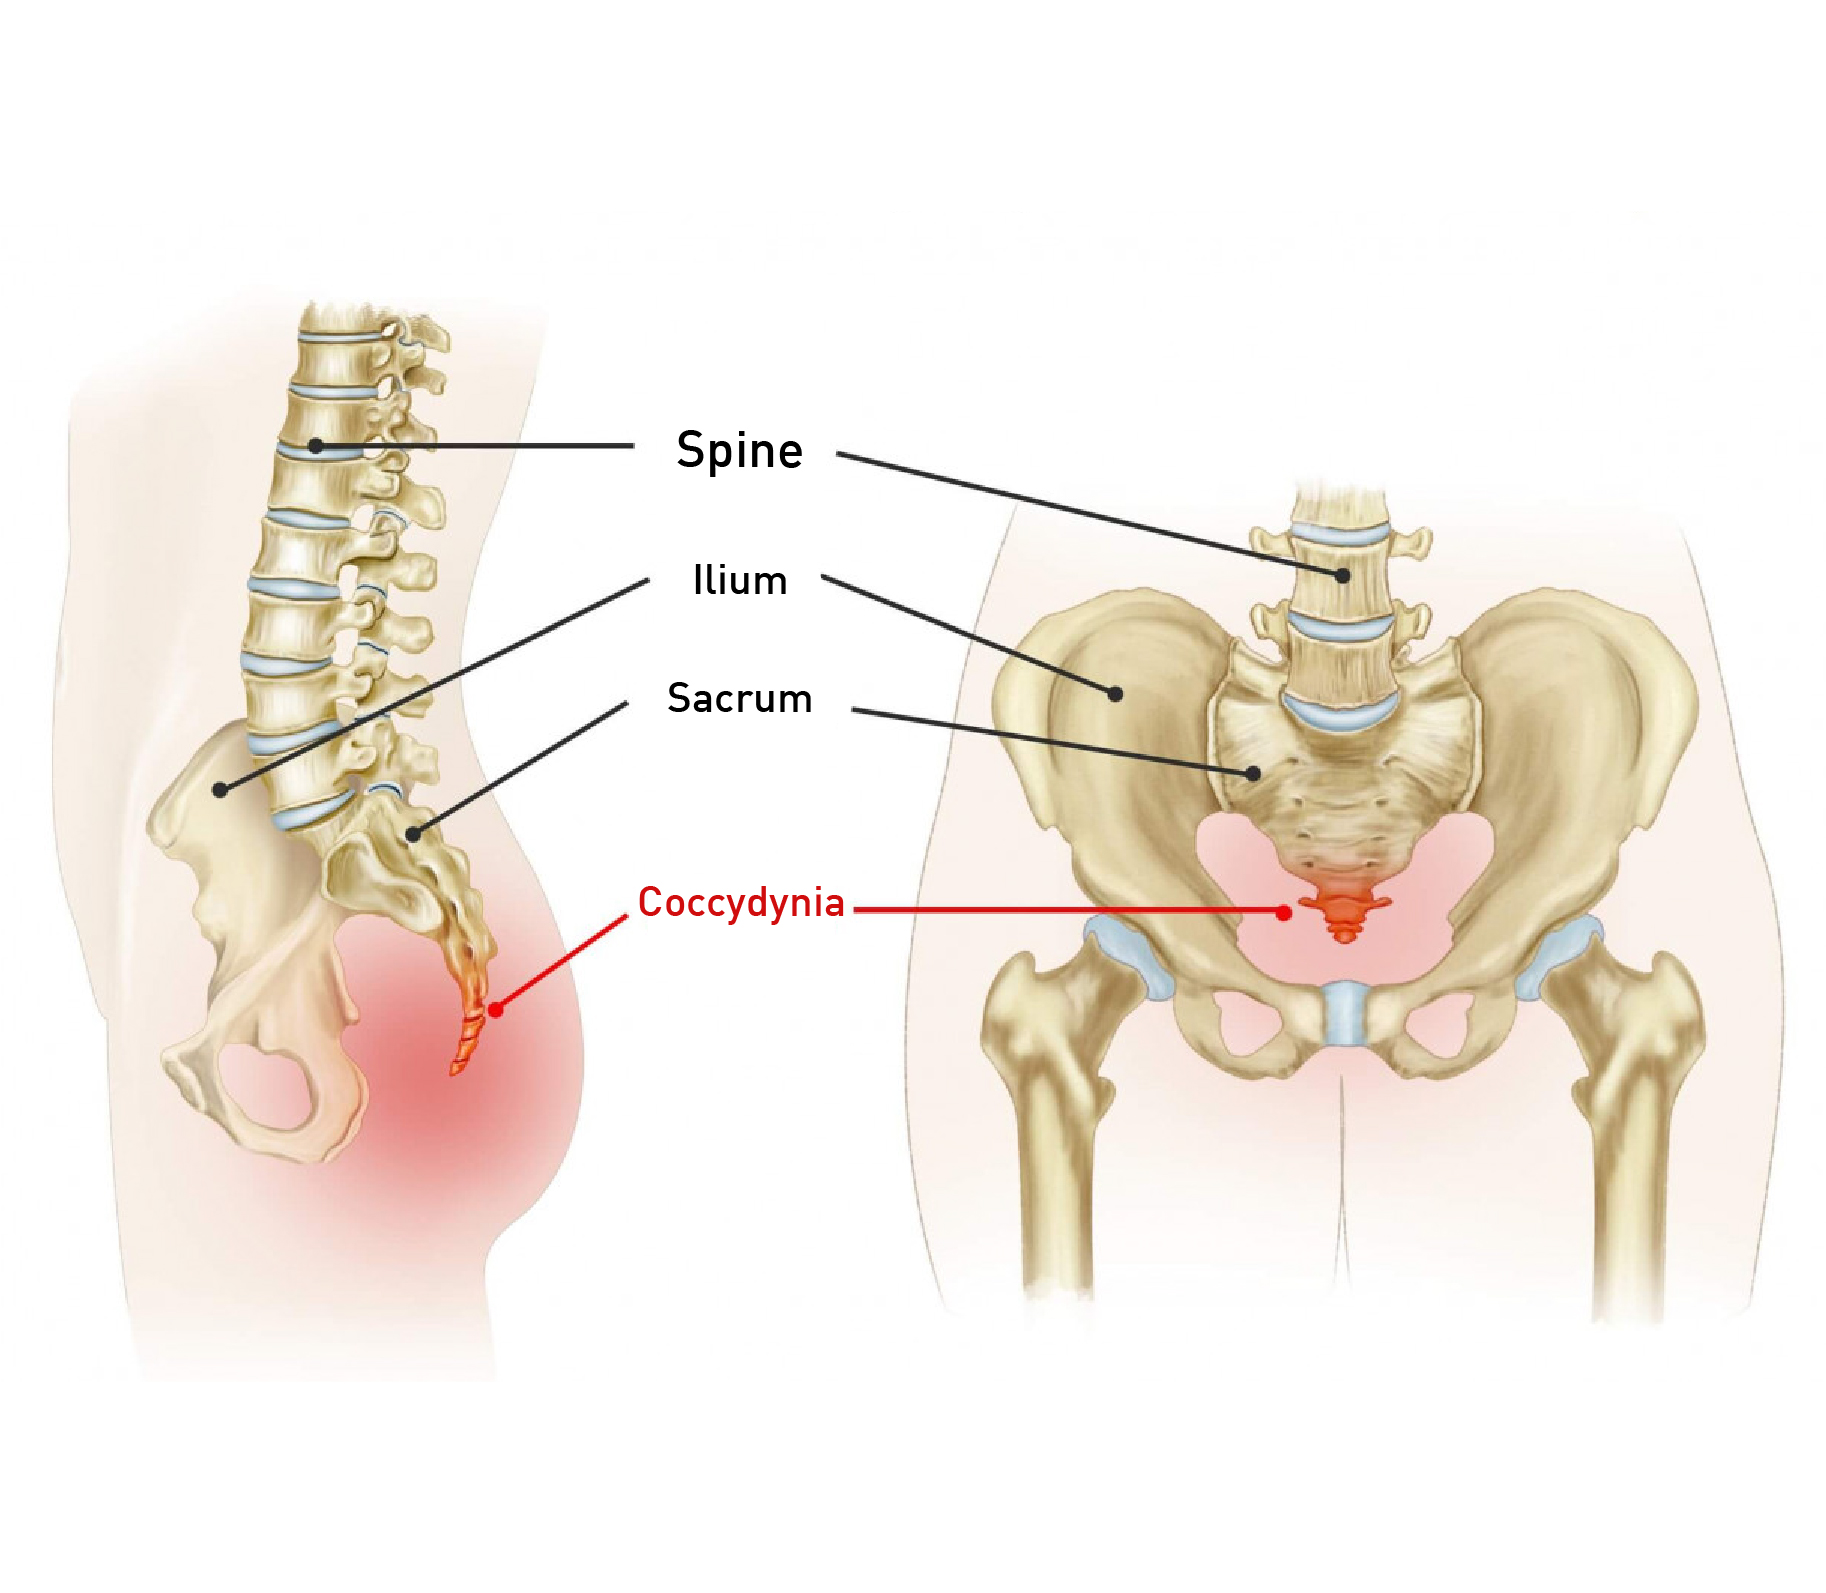 Relieve TAILBONE PAIN in SITTING  4 Physiotherapy Treatments for